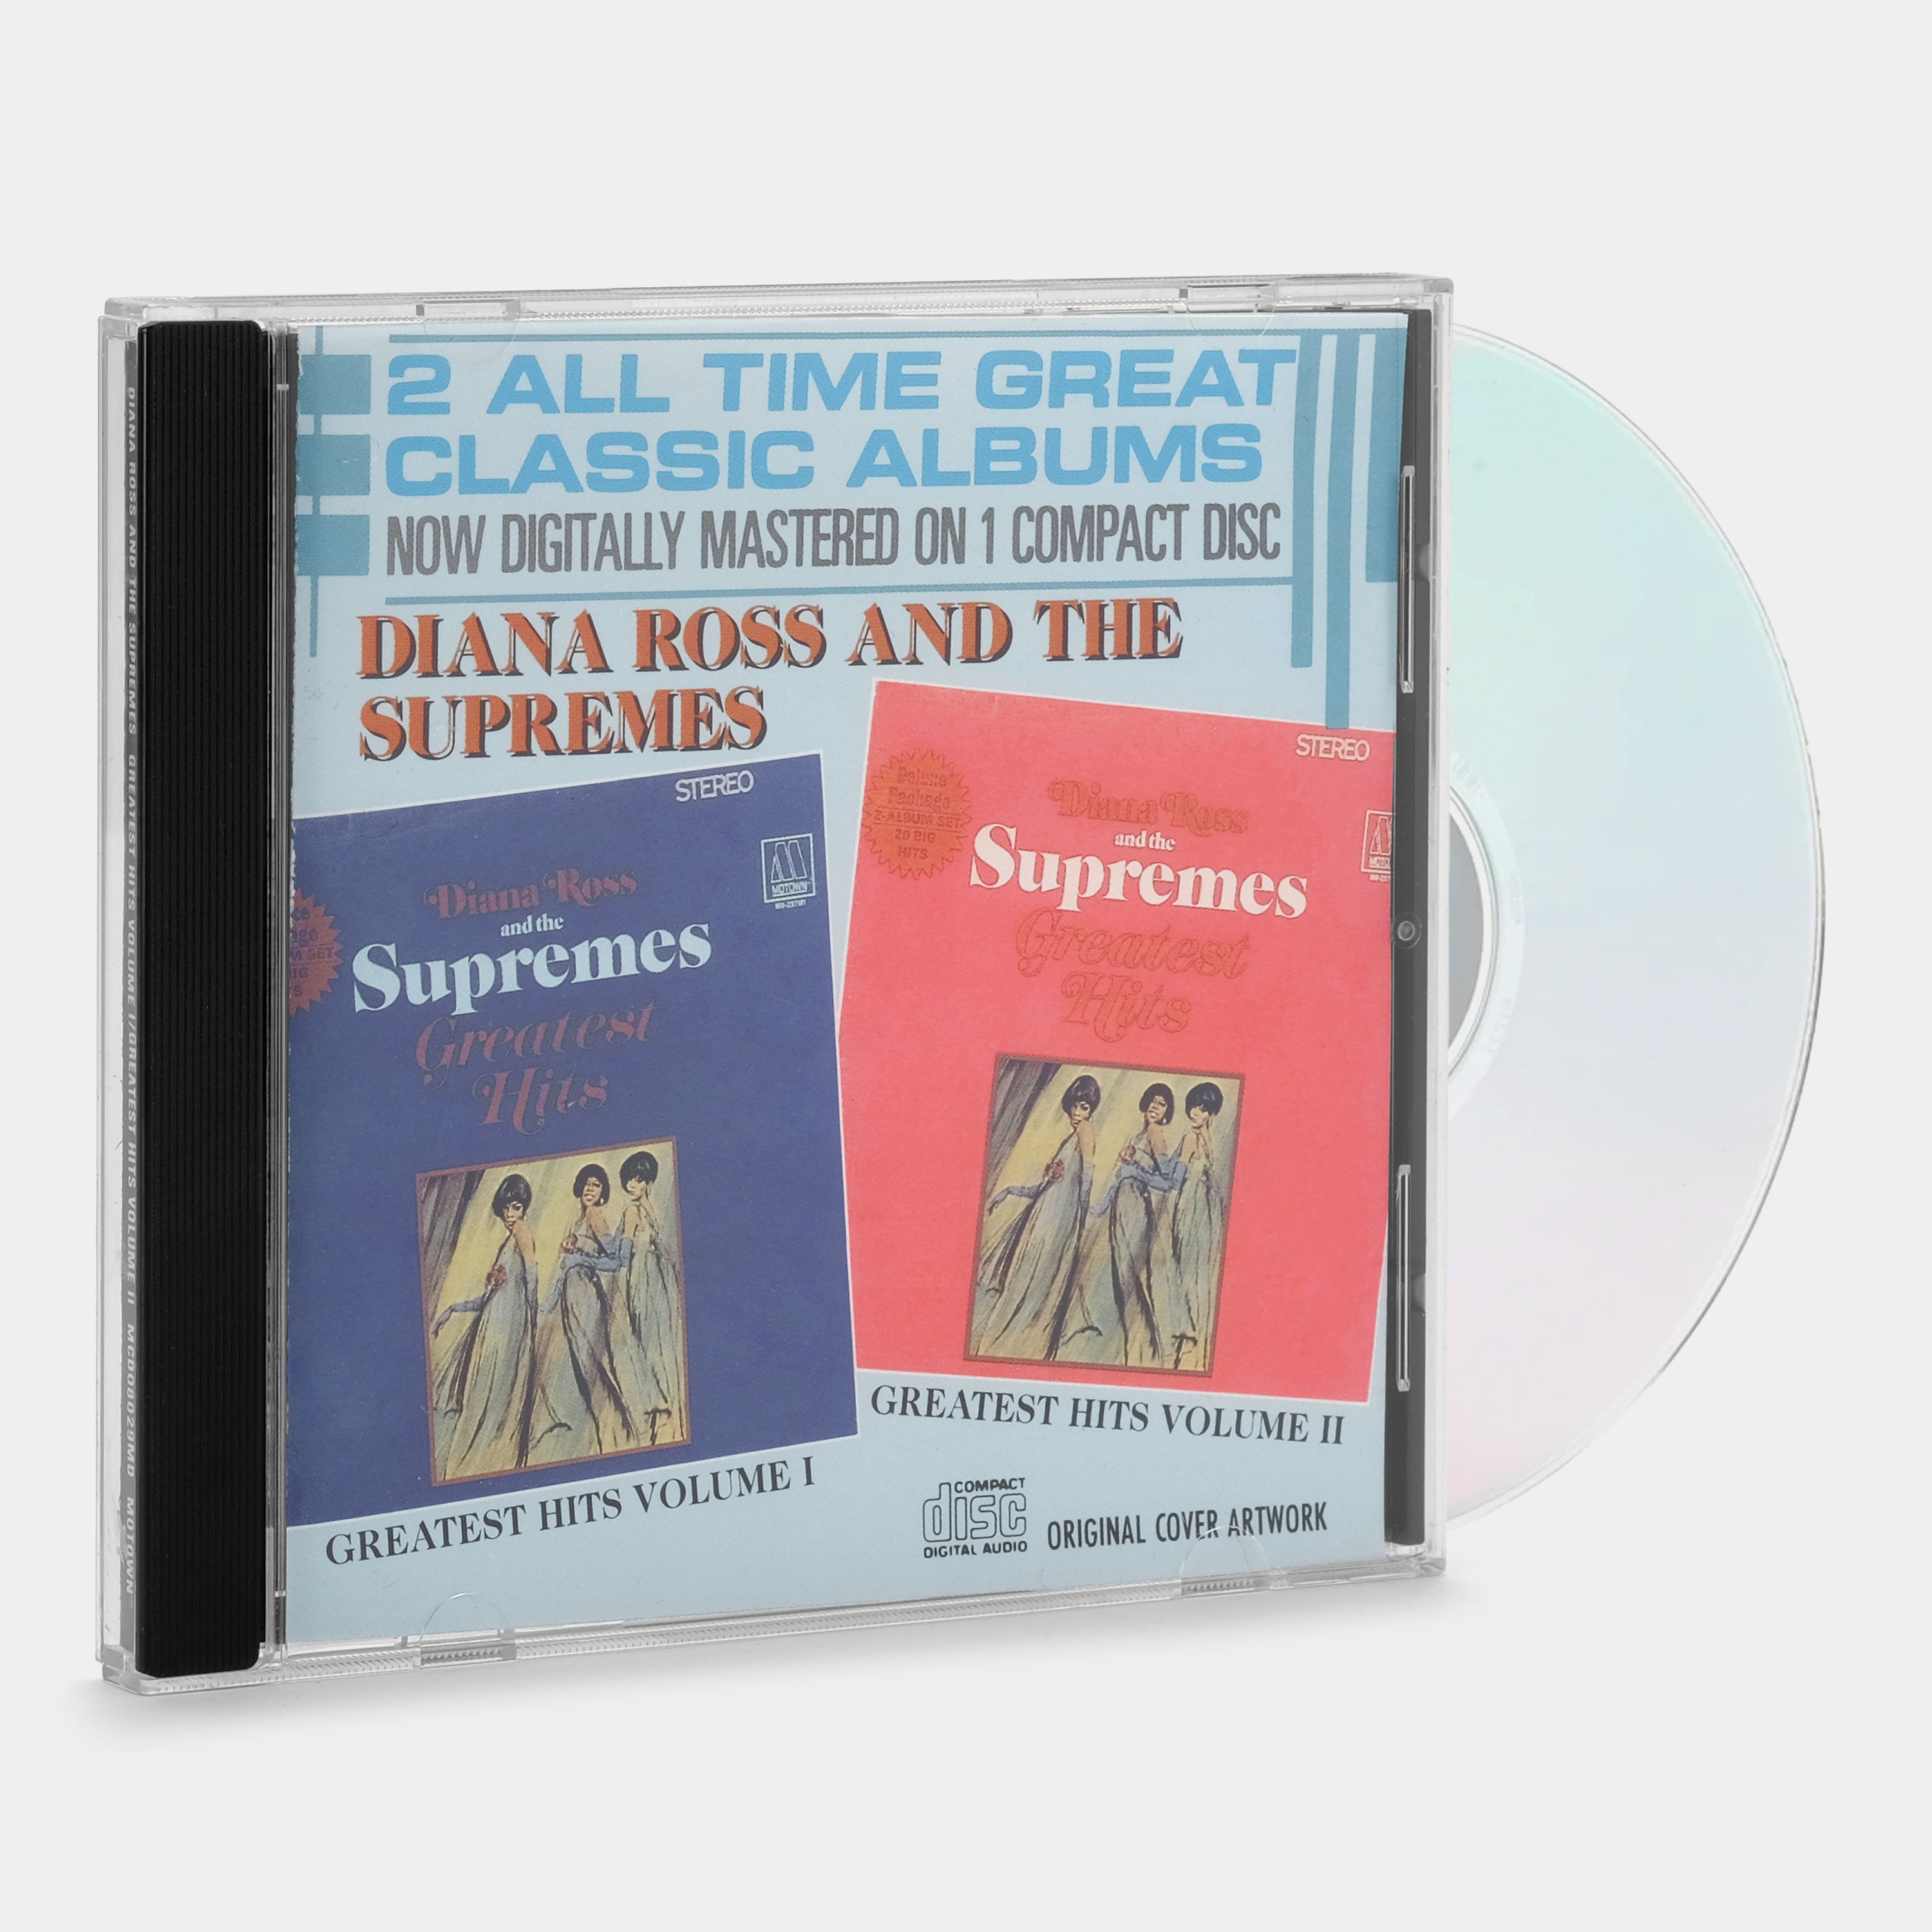 Diana Ross And The Supremes - Greatest Hits Volume I / Greatest Hits Volume II CD